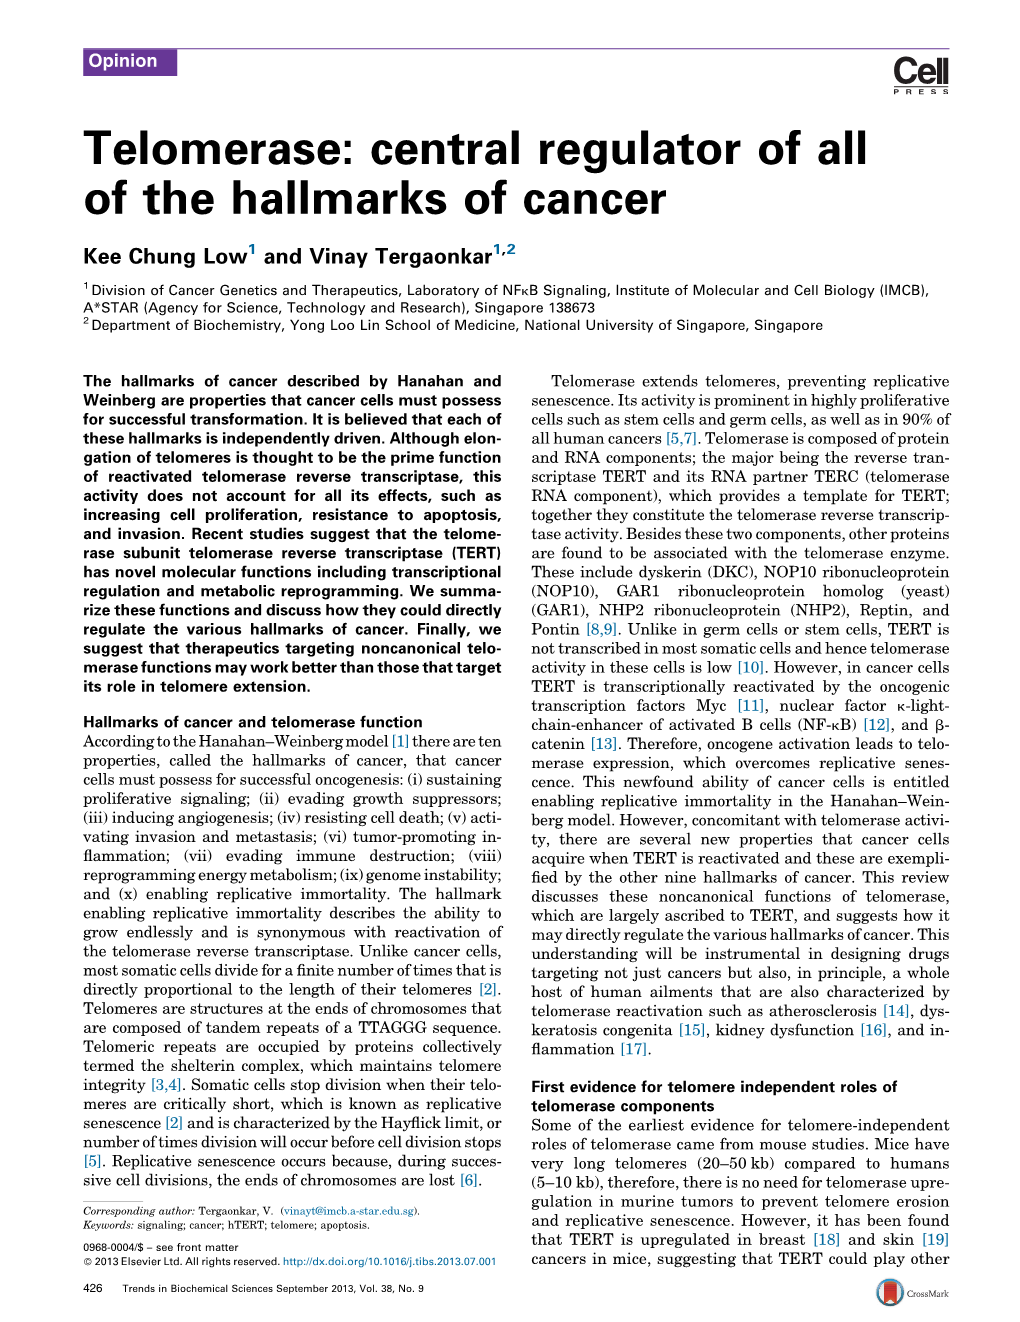 Telomerase: Central Regulator of All of the Hallmarks of Cancer